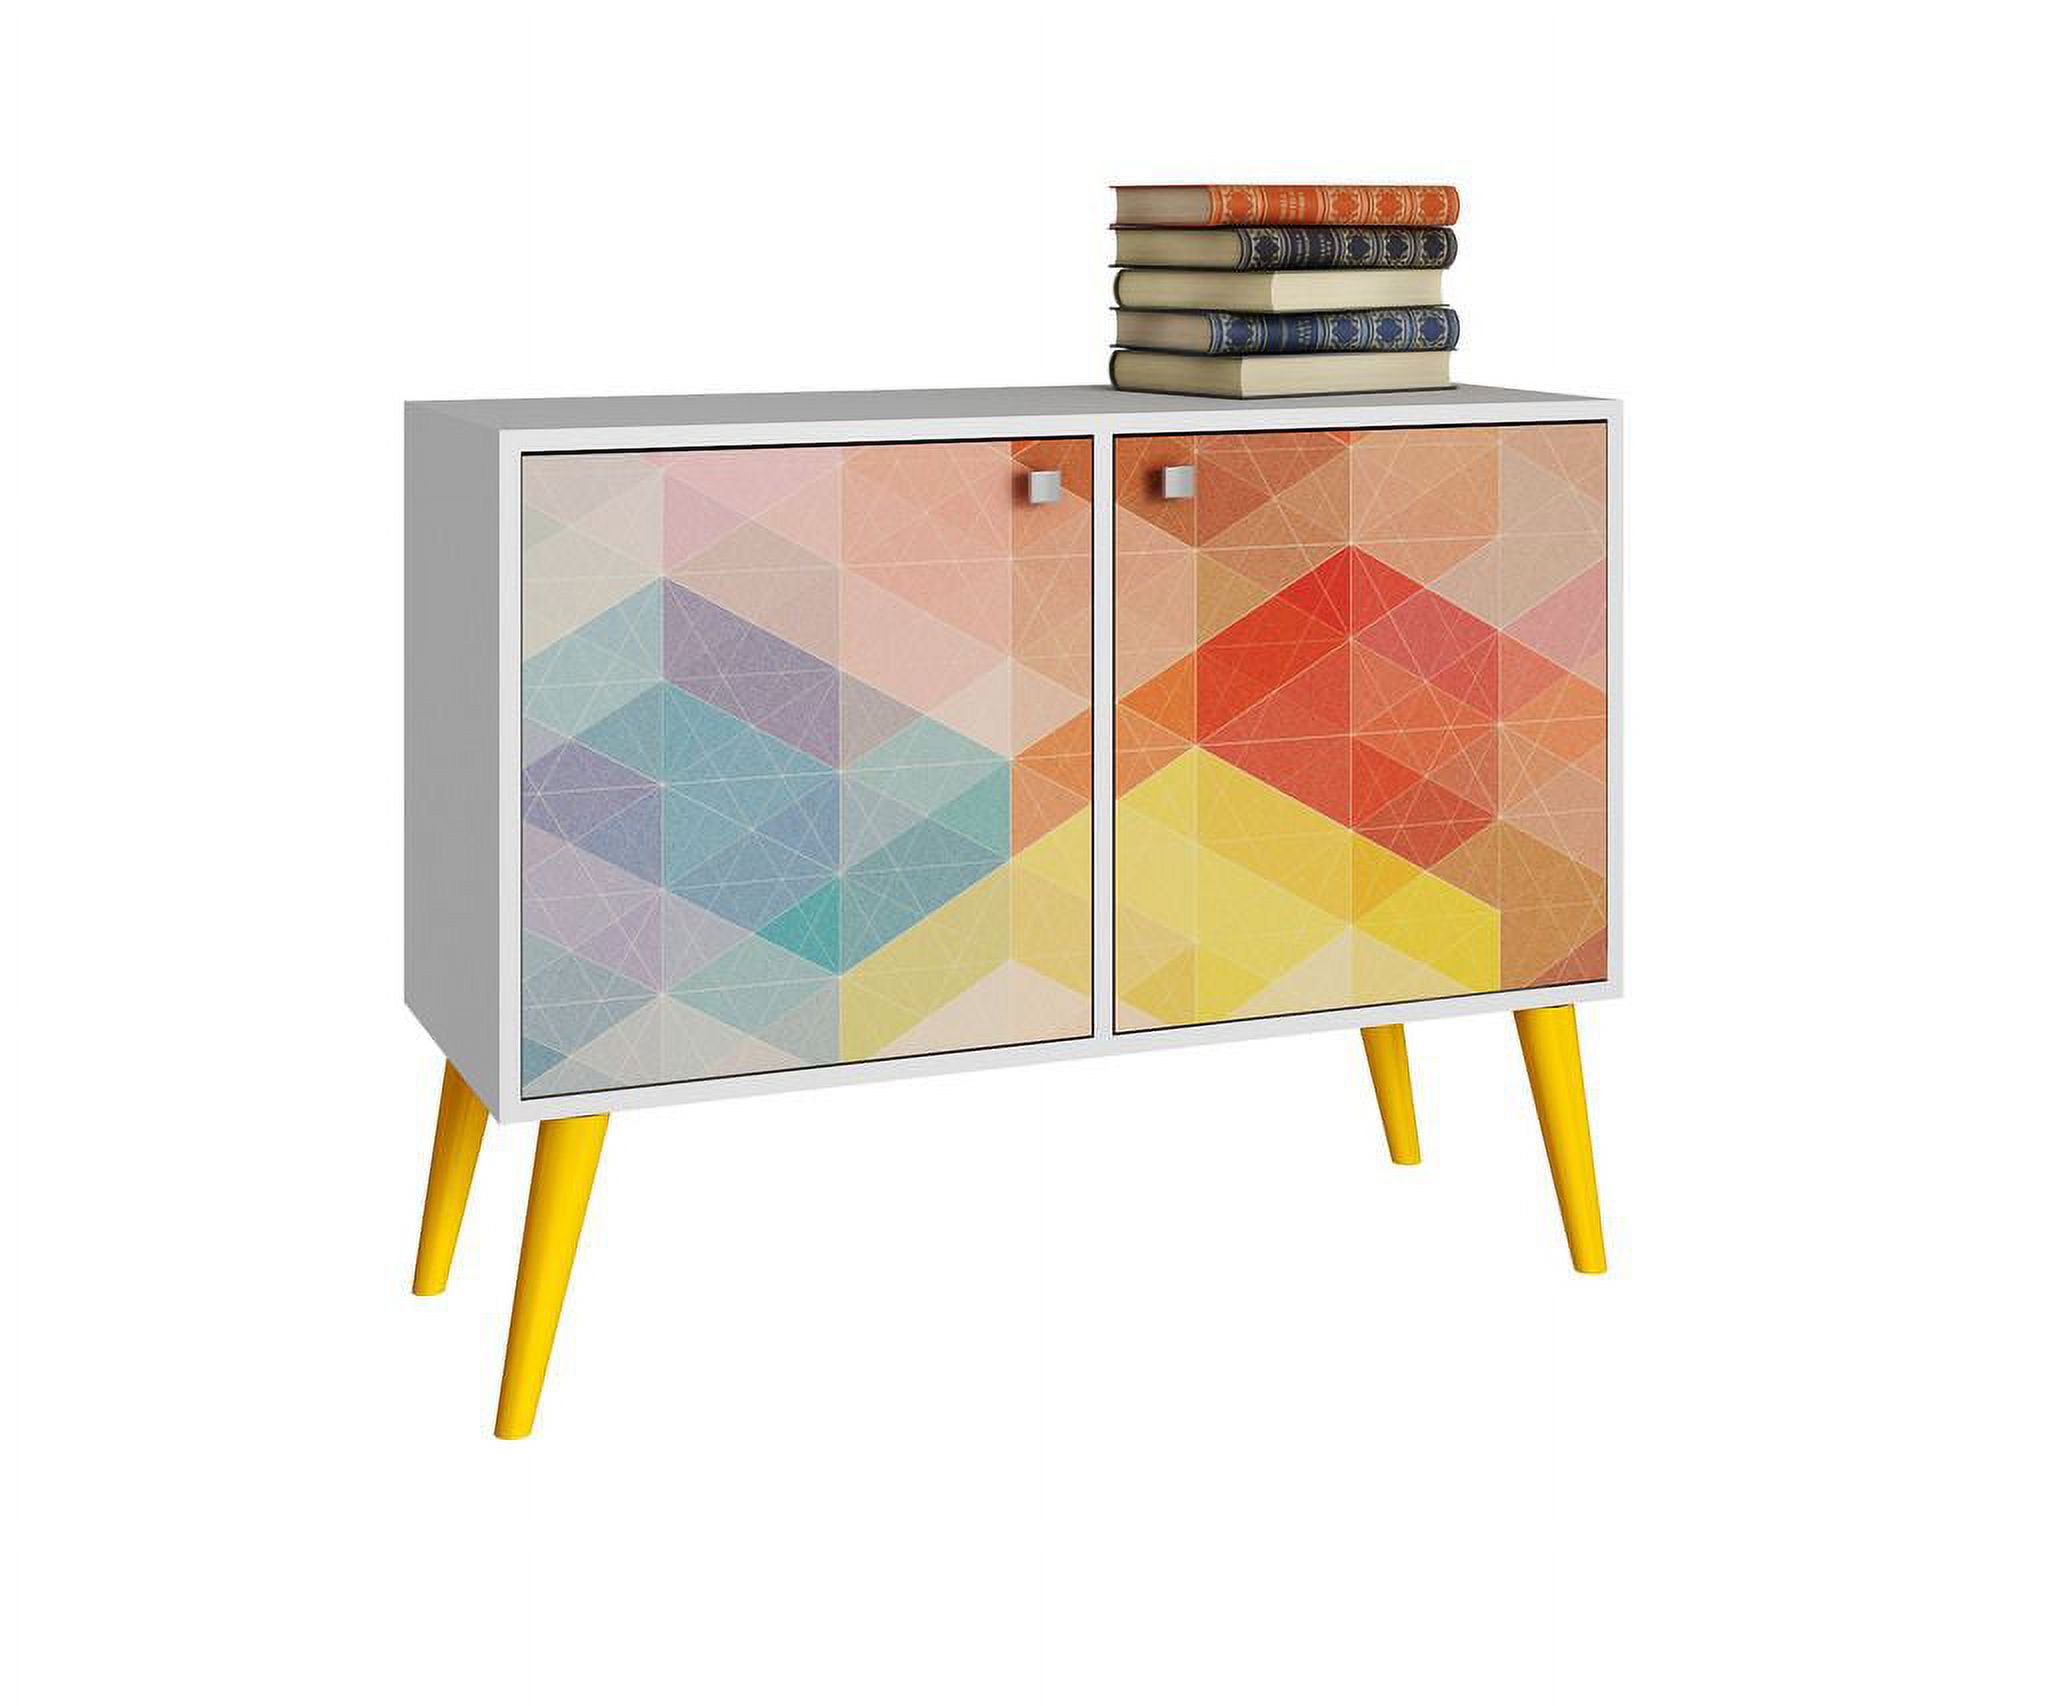 Avesta Double Side Table. 2.0 with 3 shelves in White/ Stamp/ Yellow - image 2 of 2